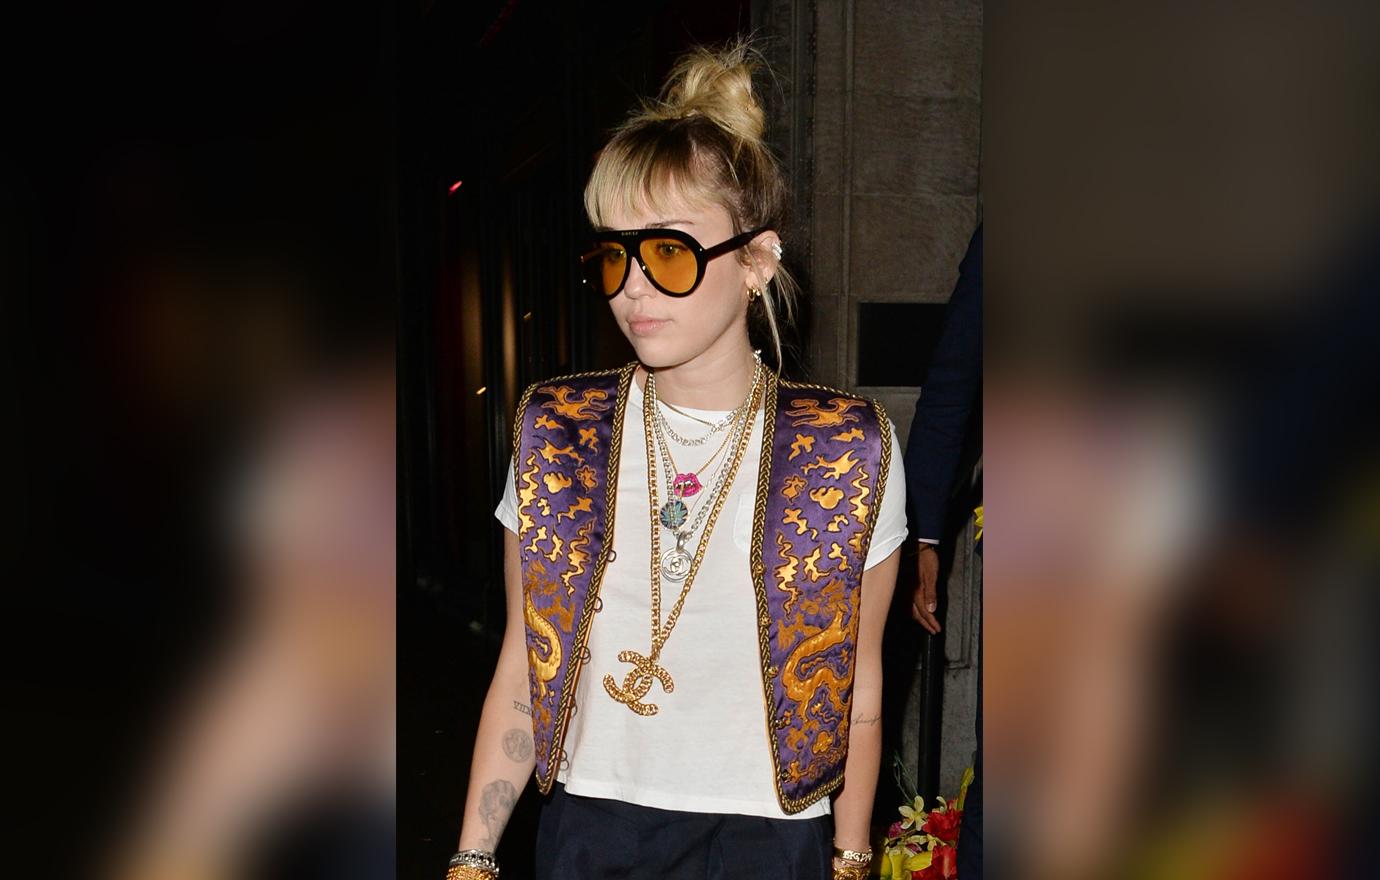 Miley Cyrus Looks Serious as She Walks Outside a Restaurant Wearing Large Orange Sunglasses a White Top With A Orange and Purple Vest and Large Chanel Chain Necklaces